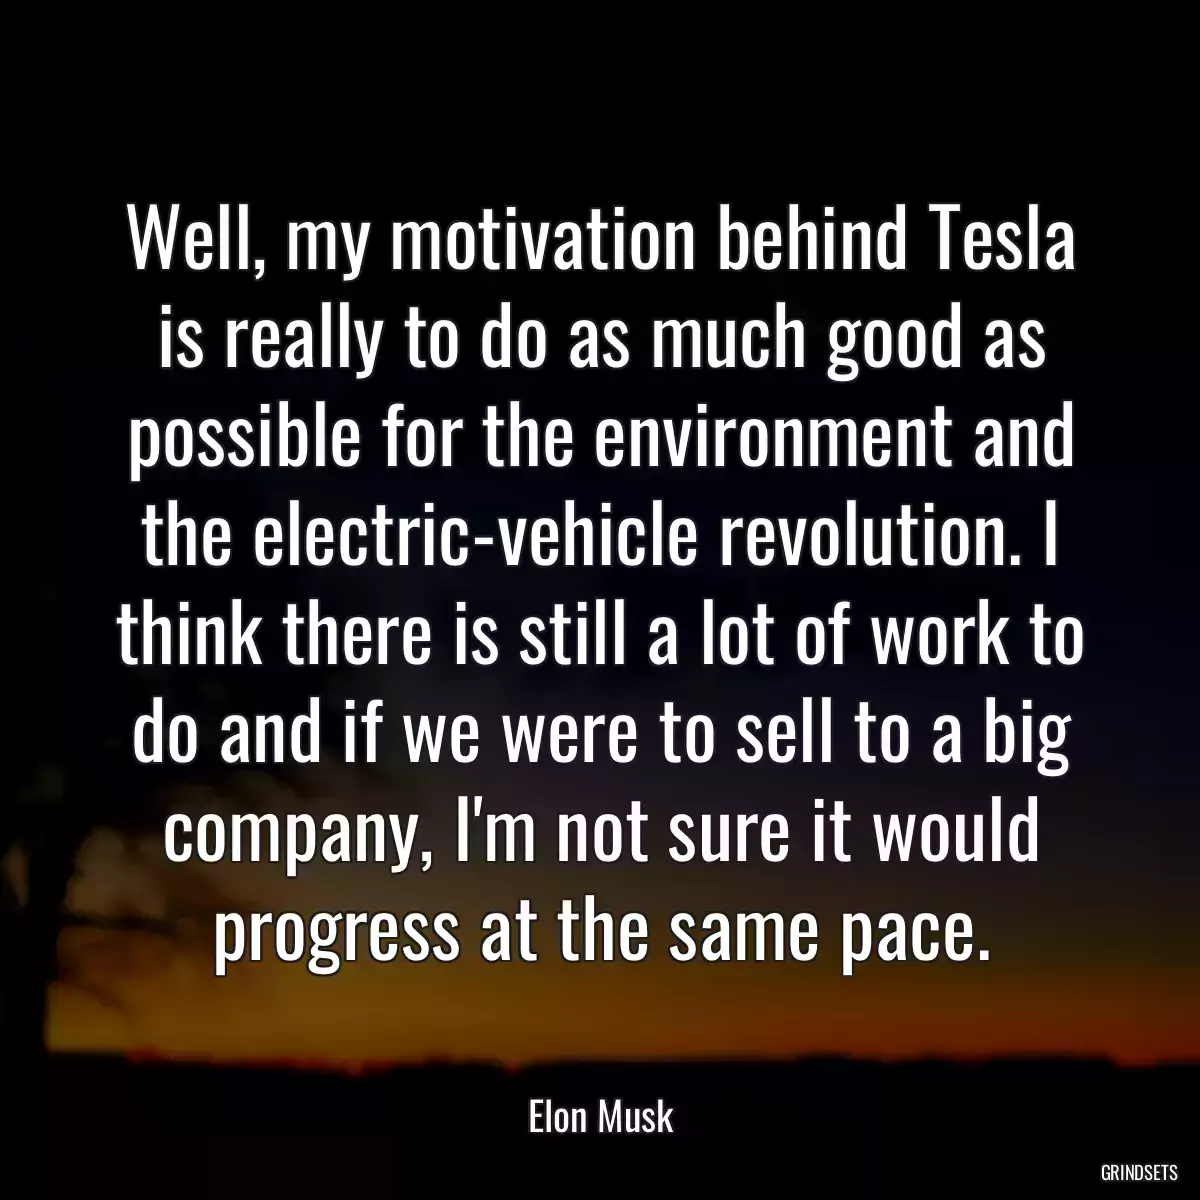 Well, my motivation behind Tesla is really to do as much good as possible for the environment and the electric-vehicle revolution. I think there is still a lot of work to do and if we were to sell to a big company, I\'m not sure it would progress at the same pace.